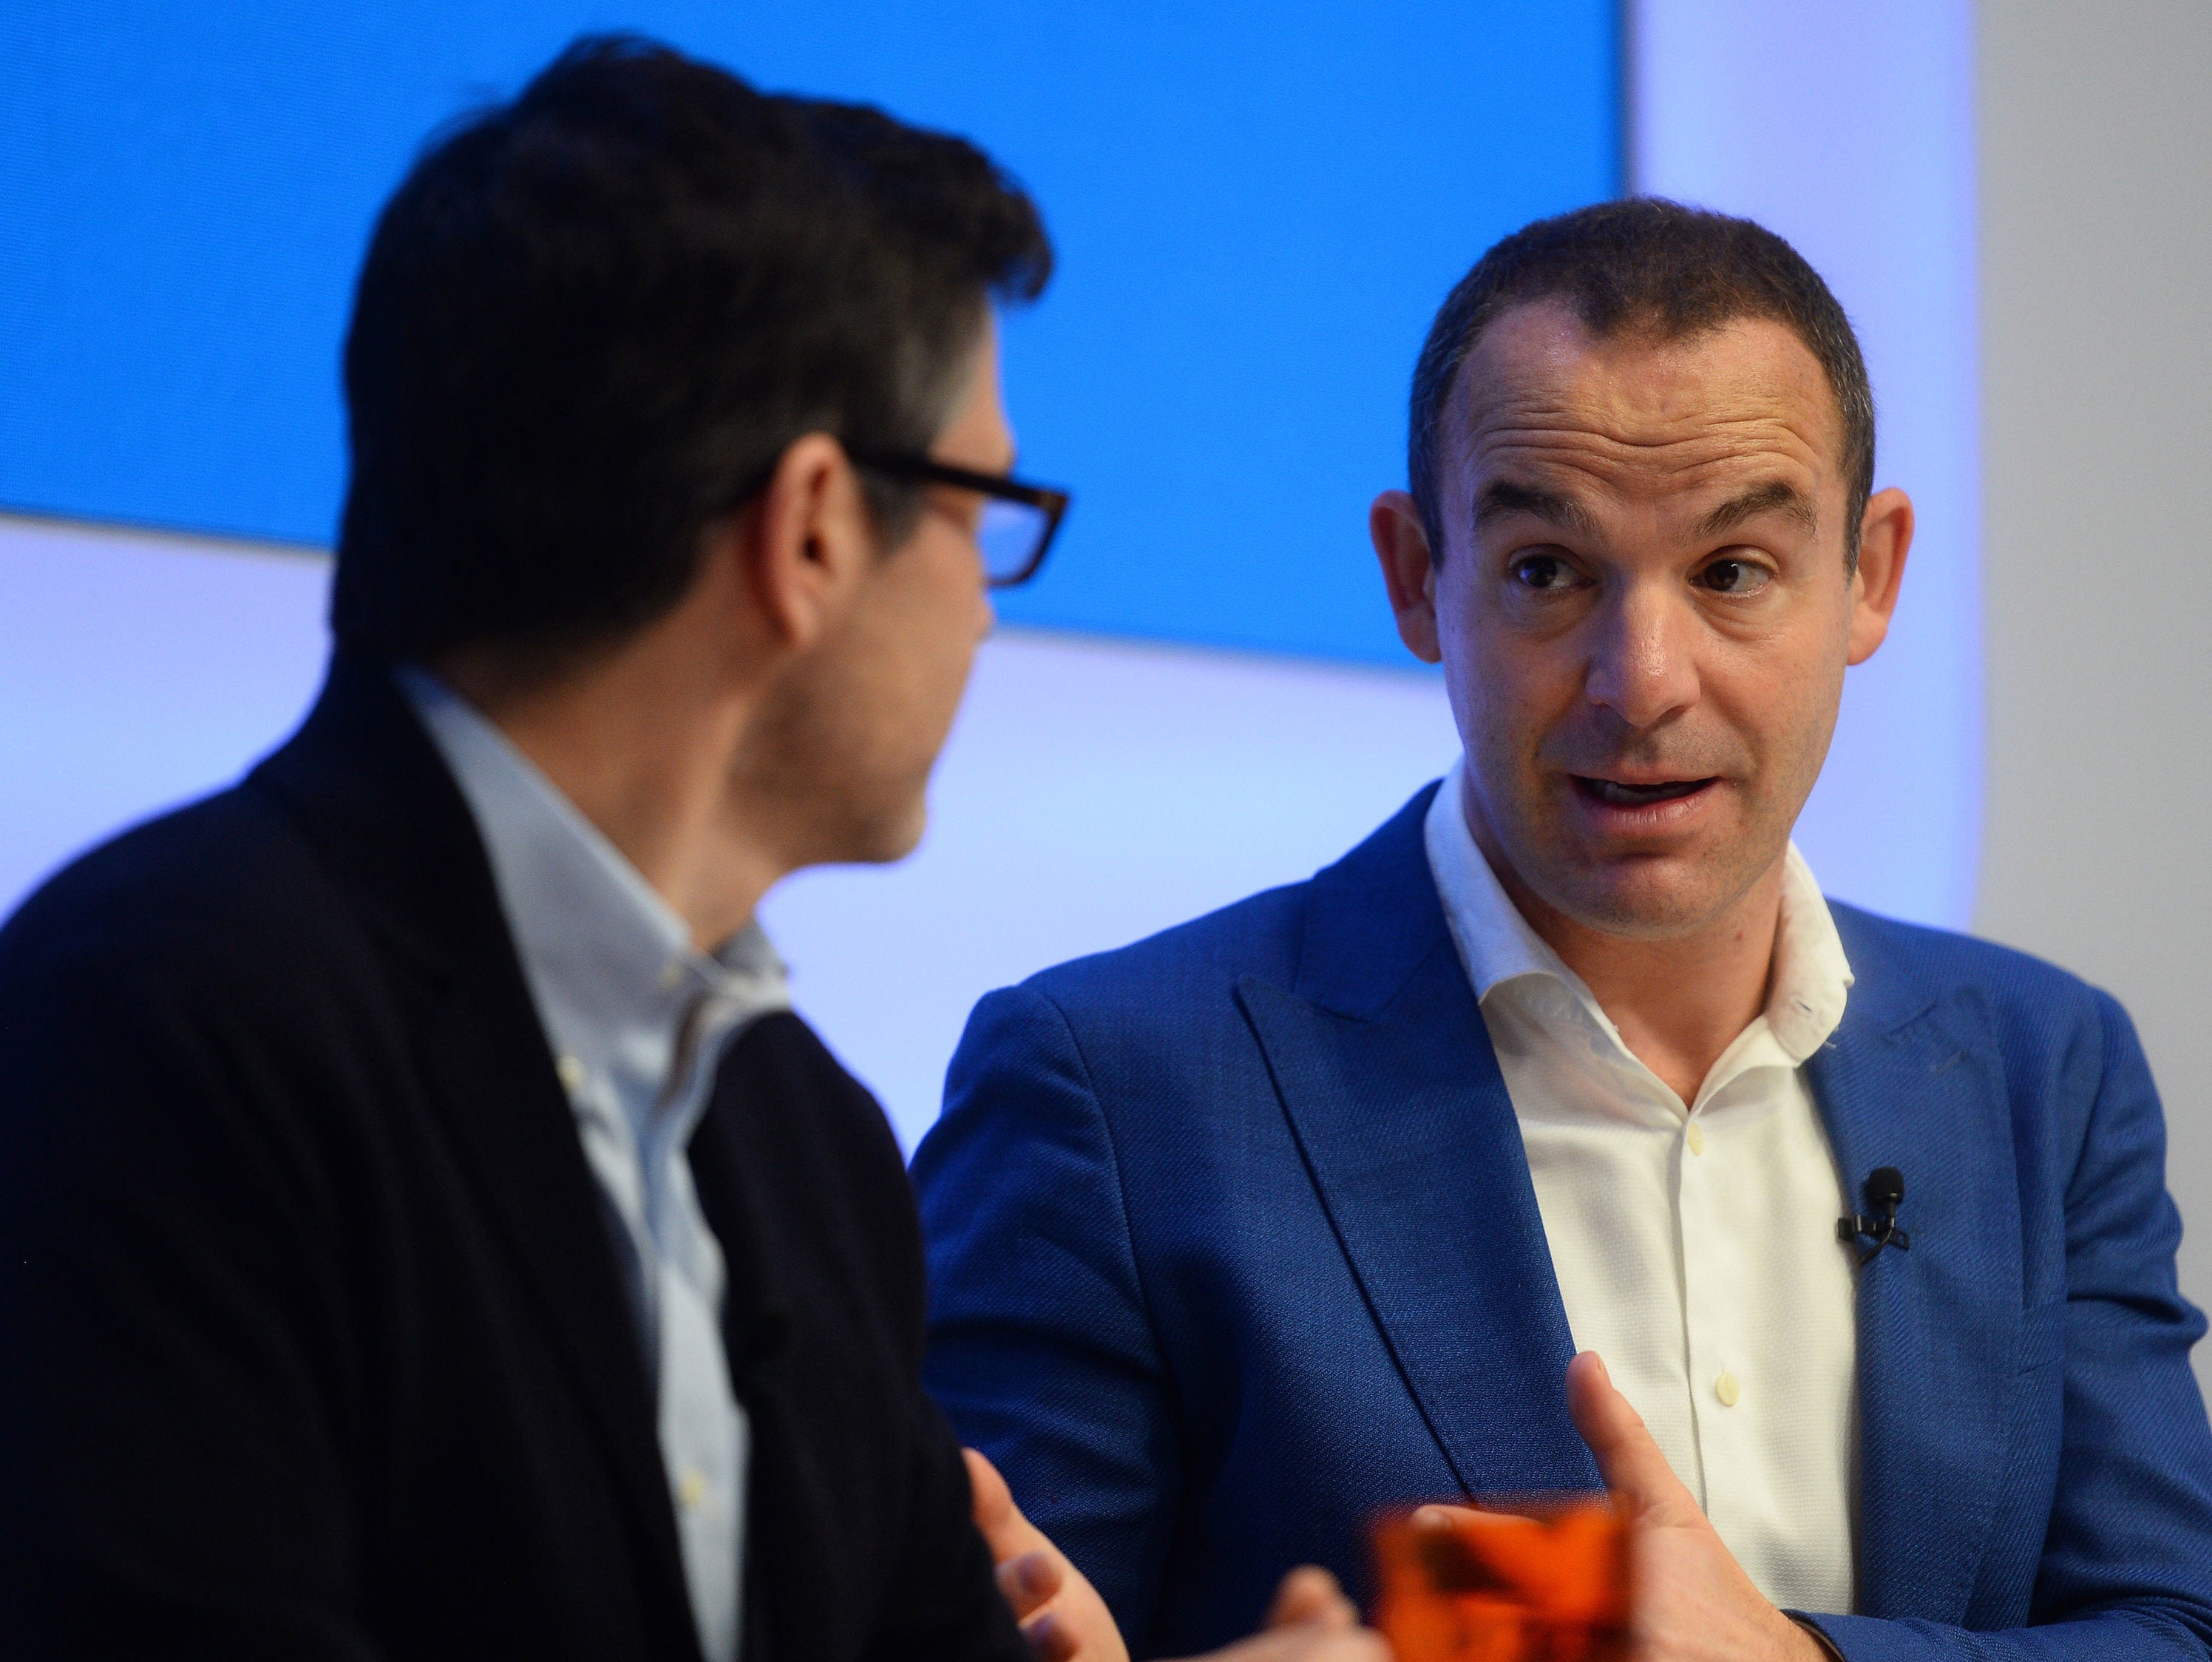 Money Saving Expert founder Martin Lewis celebrates launch of new services fighting scam ads after Facebook libel threat